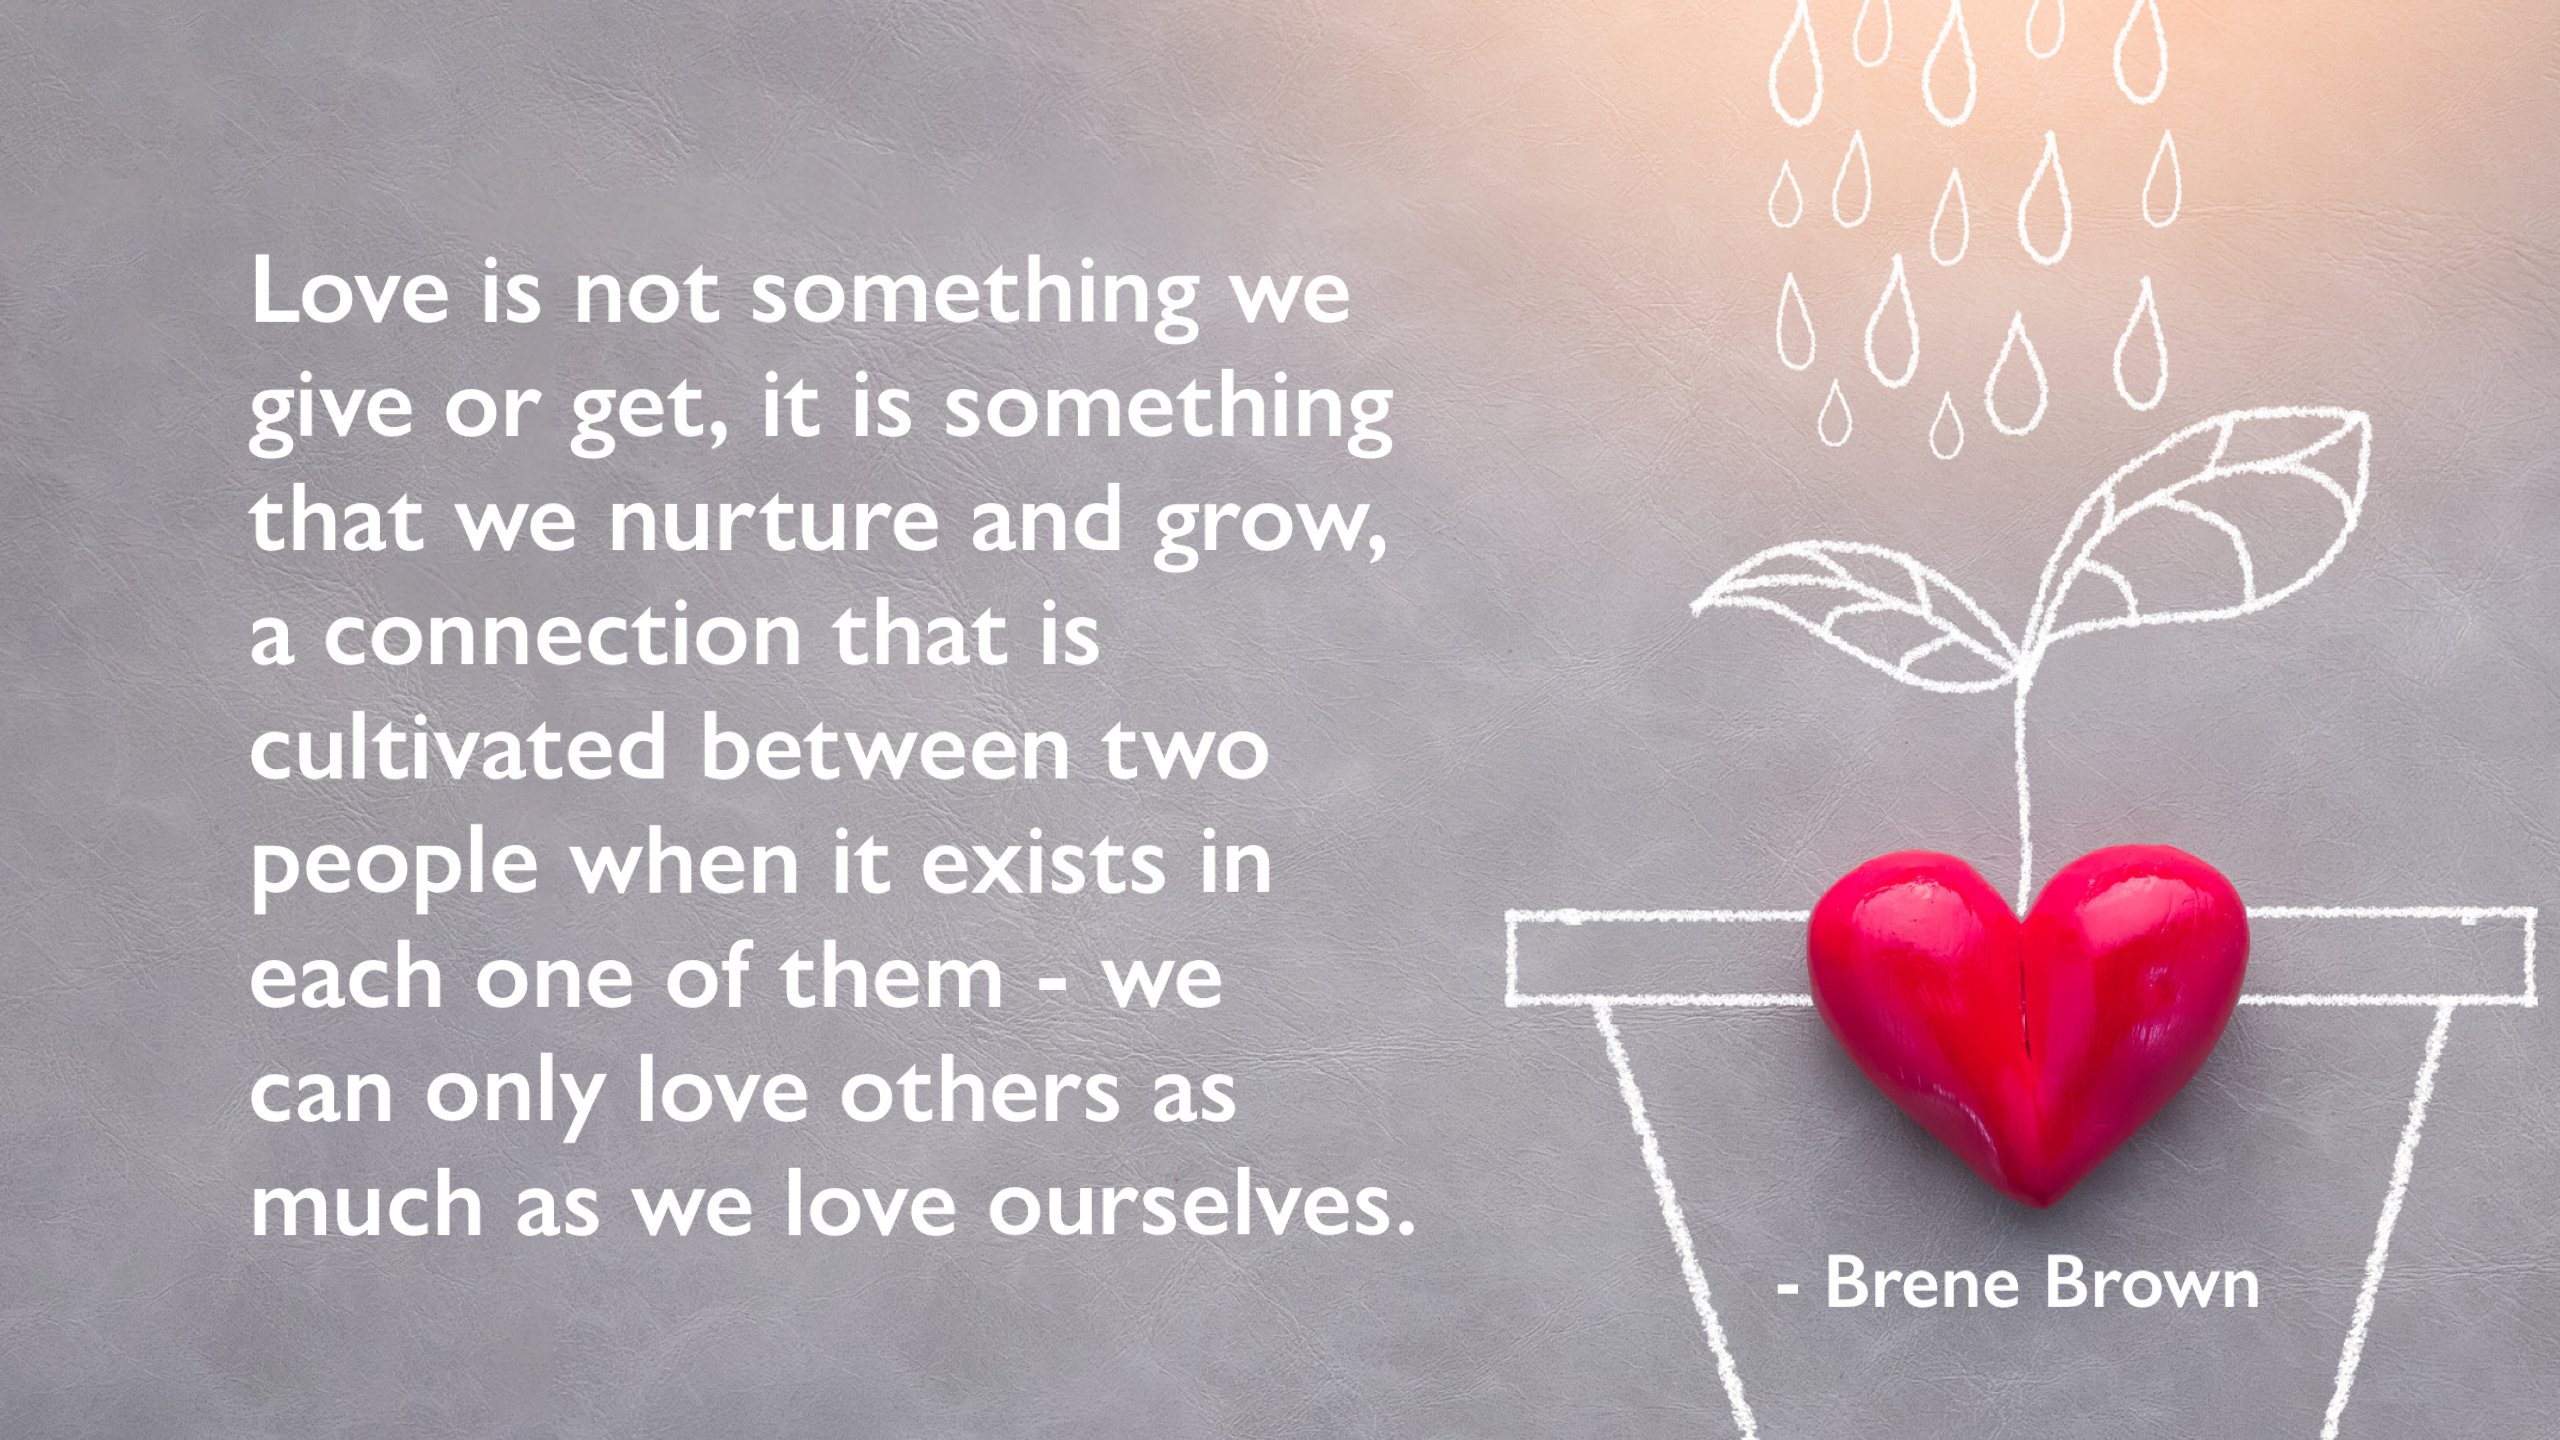 Quote by Brene Brown for TCNtalks